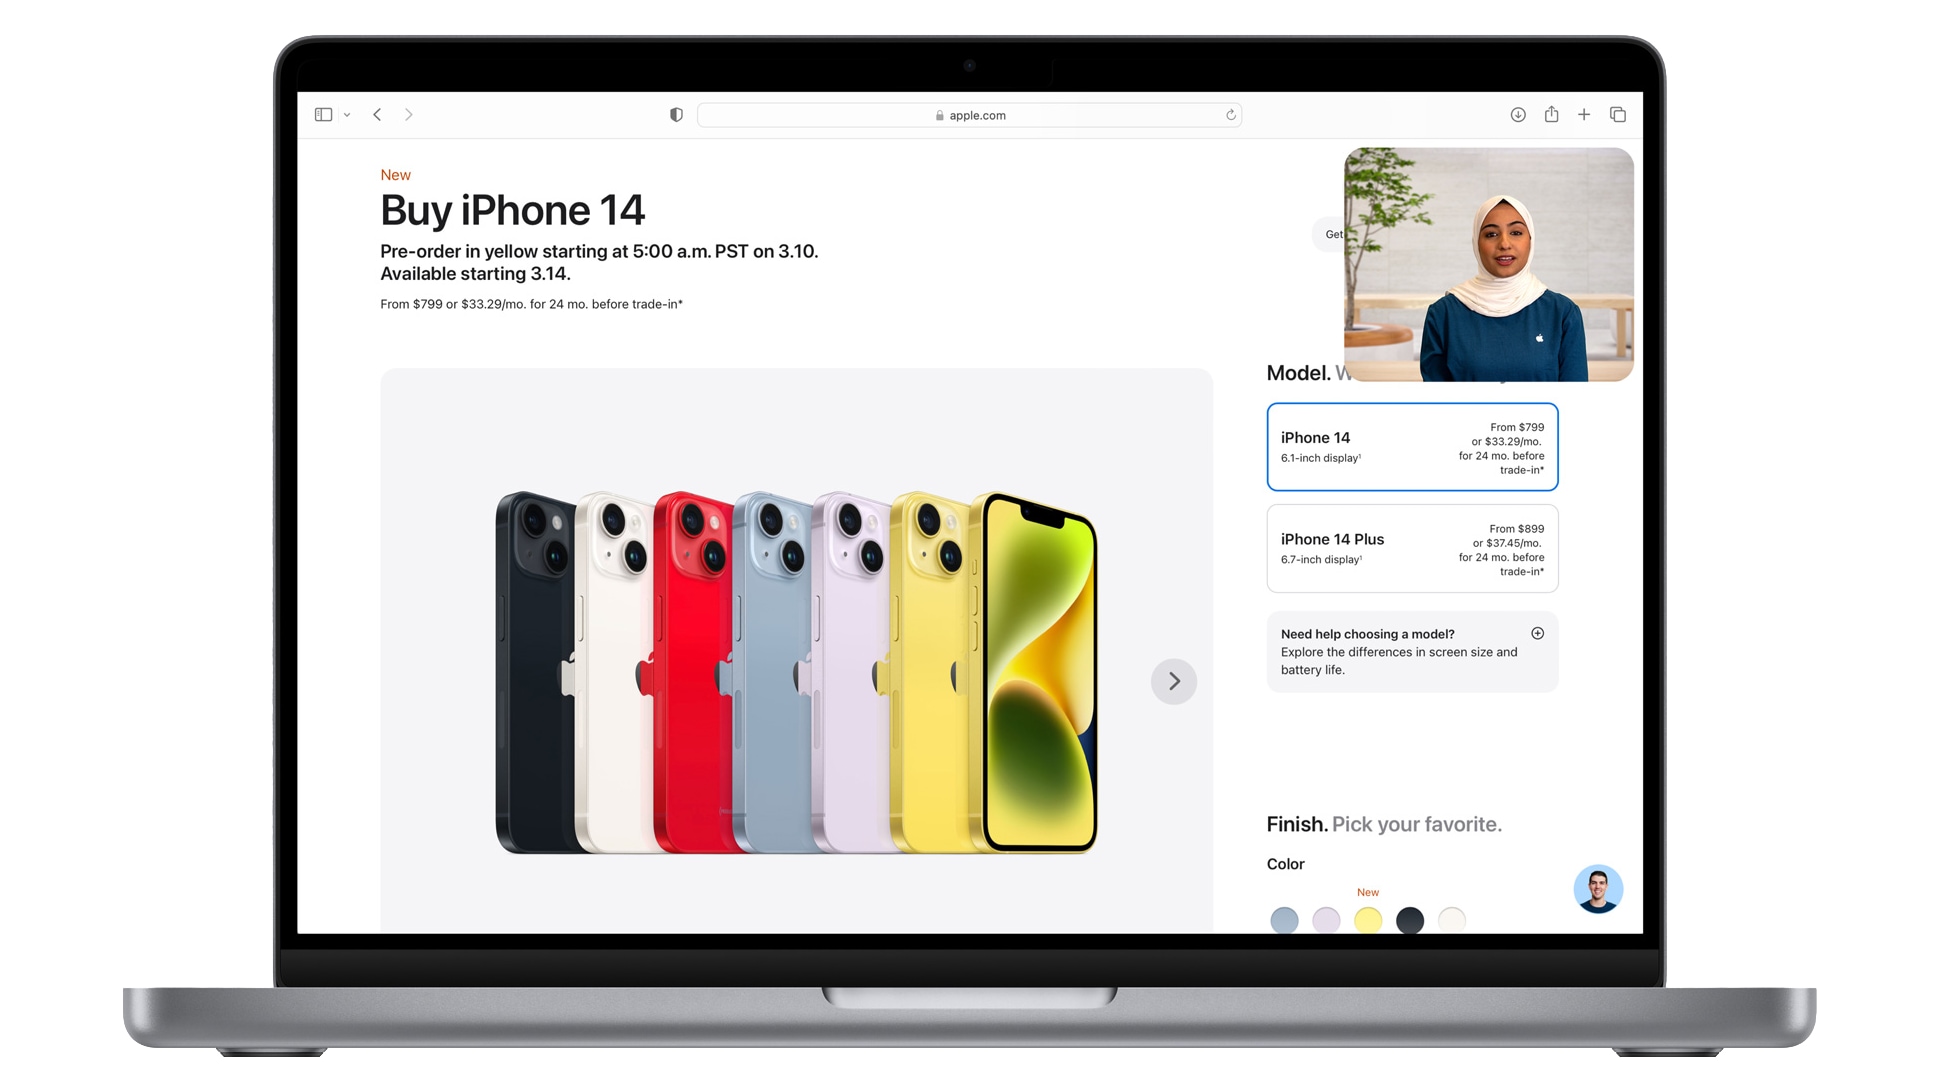 Shopping the iPhone lineup over video using a MacBook